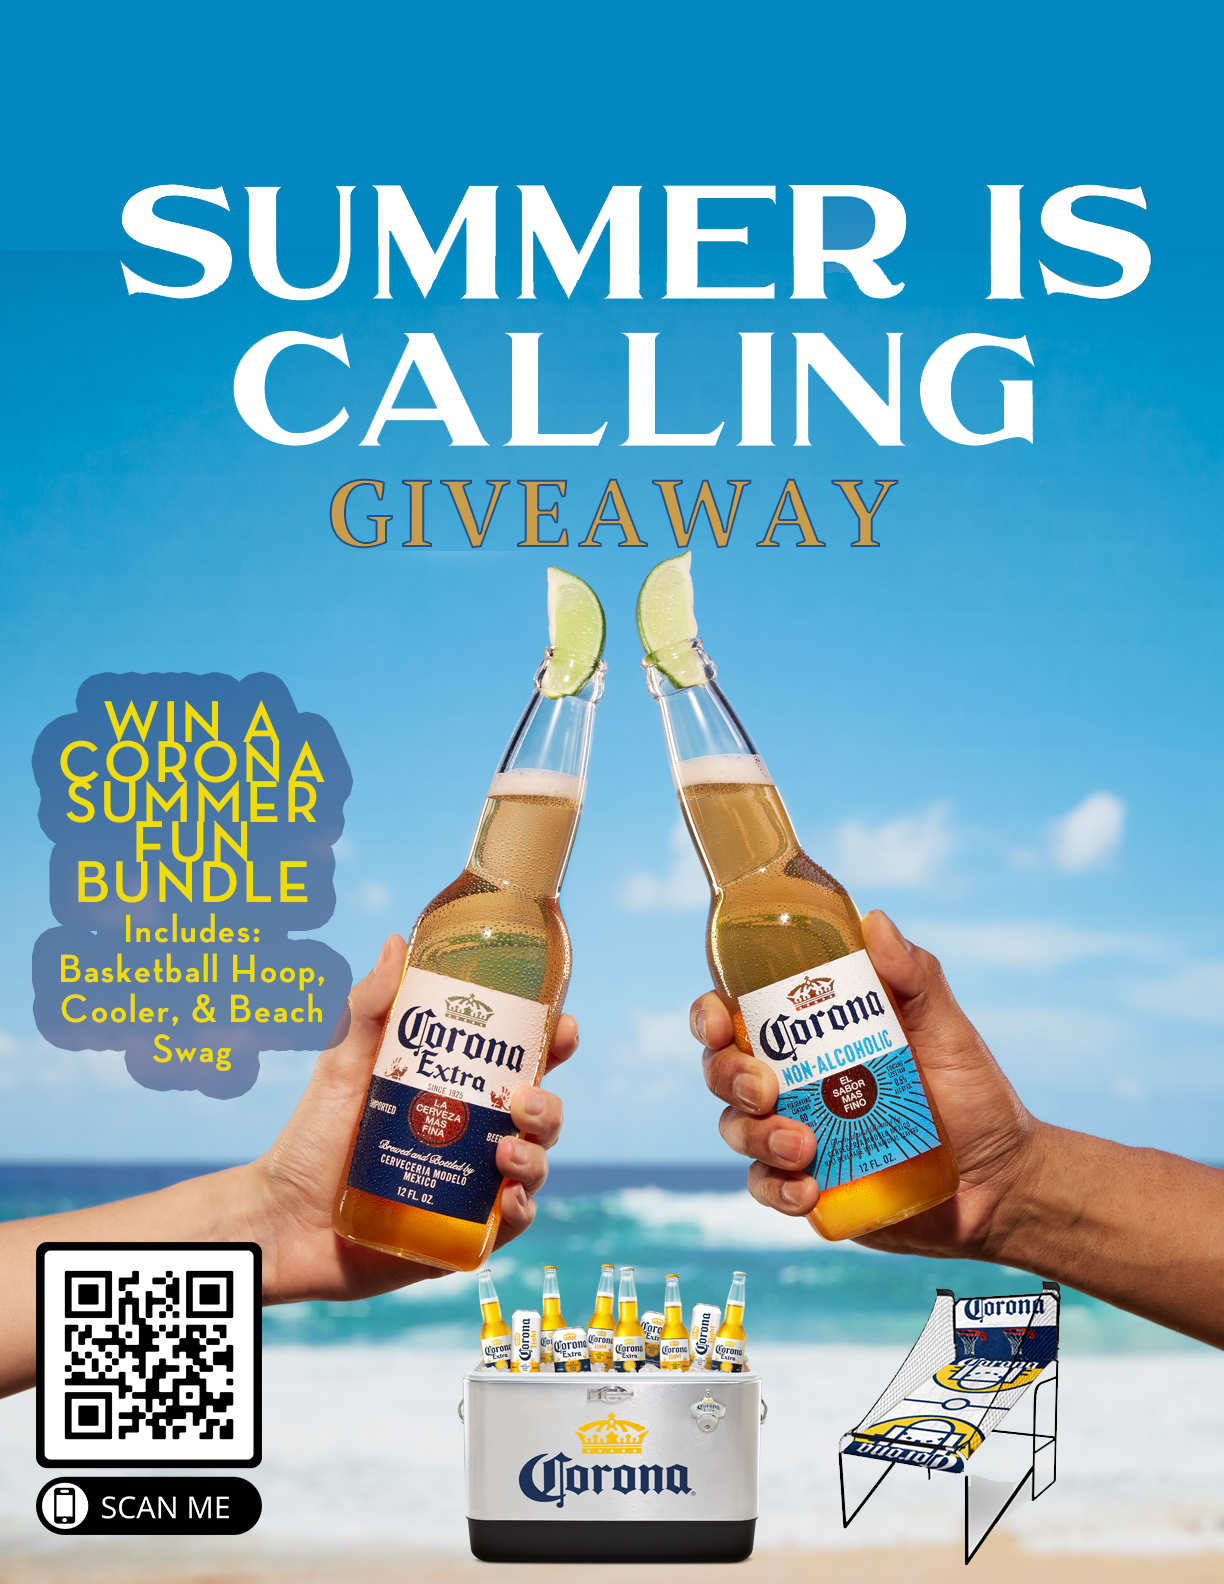 Harmony Beverage - Let's do another giveaway! Who wants a corona